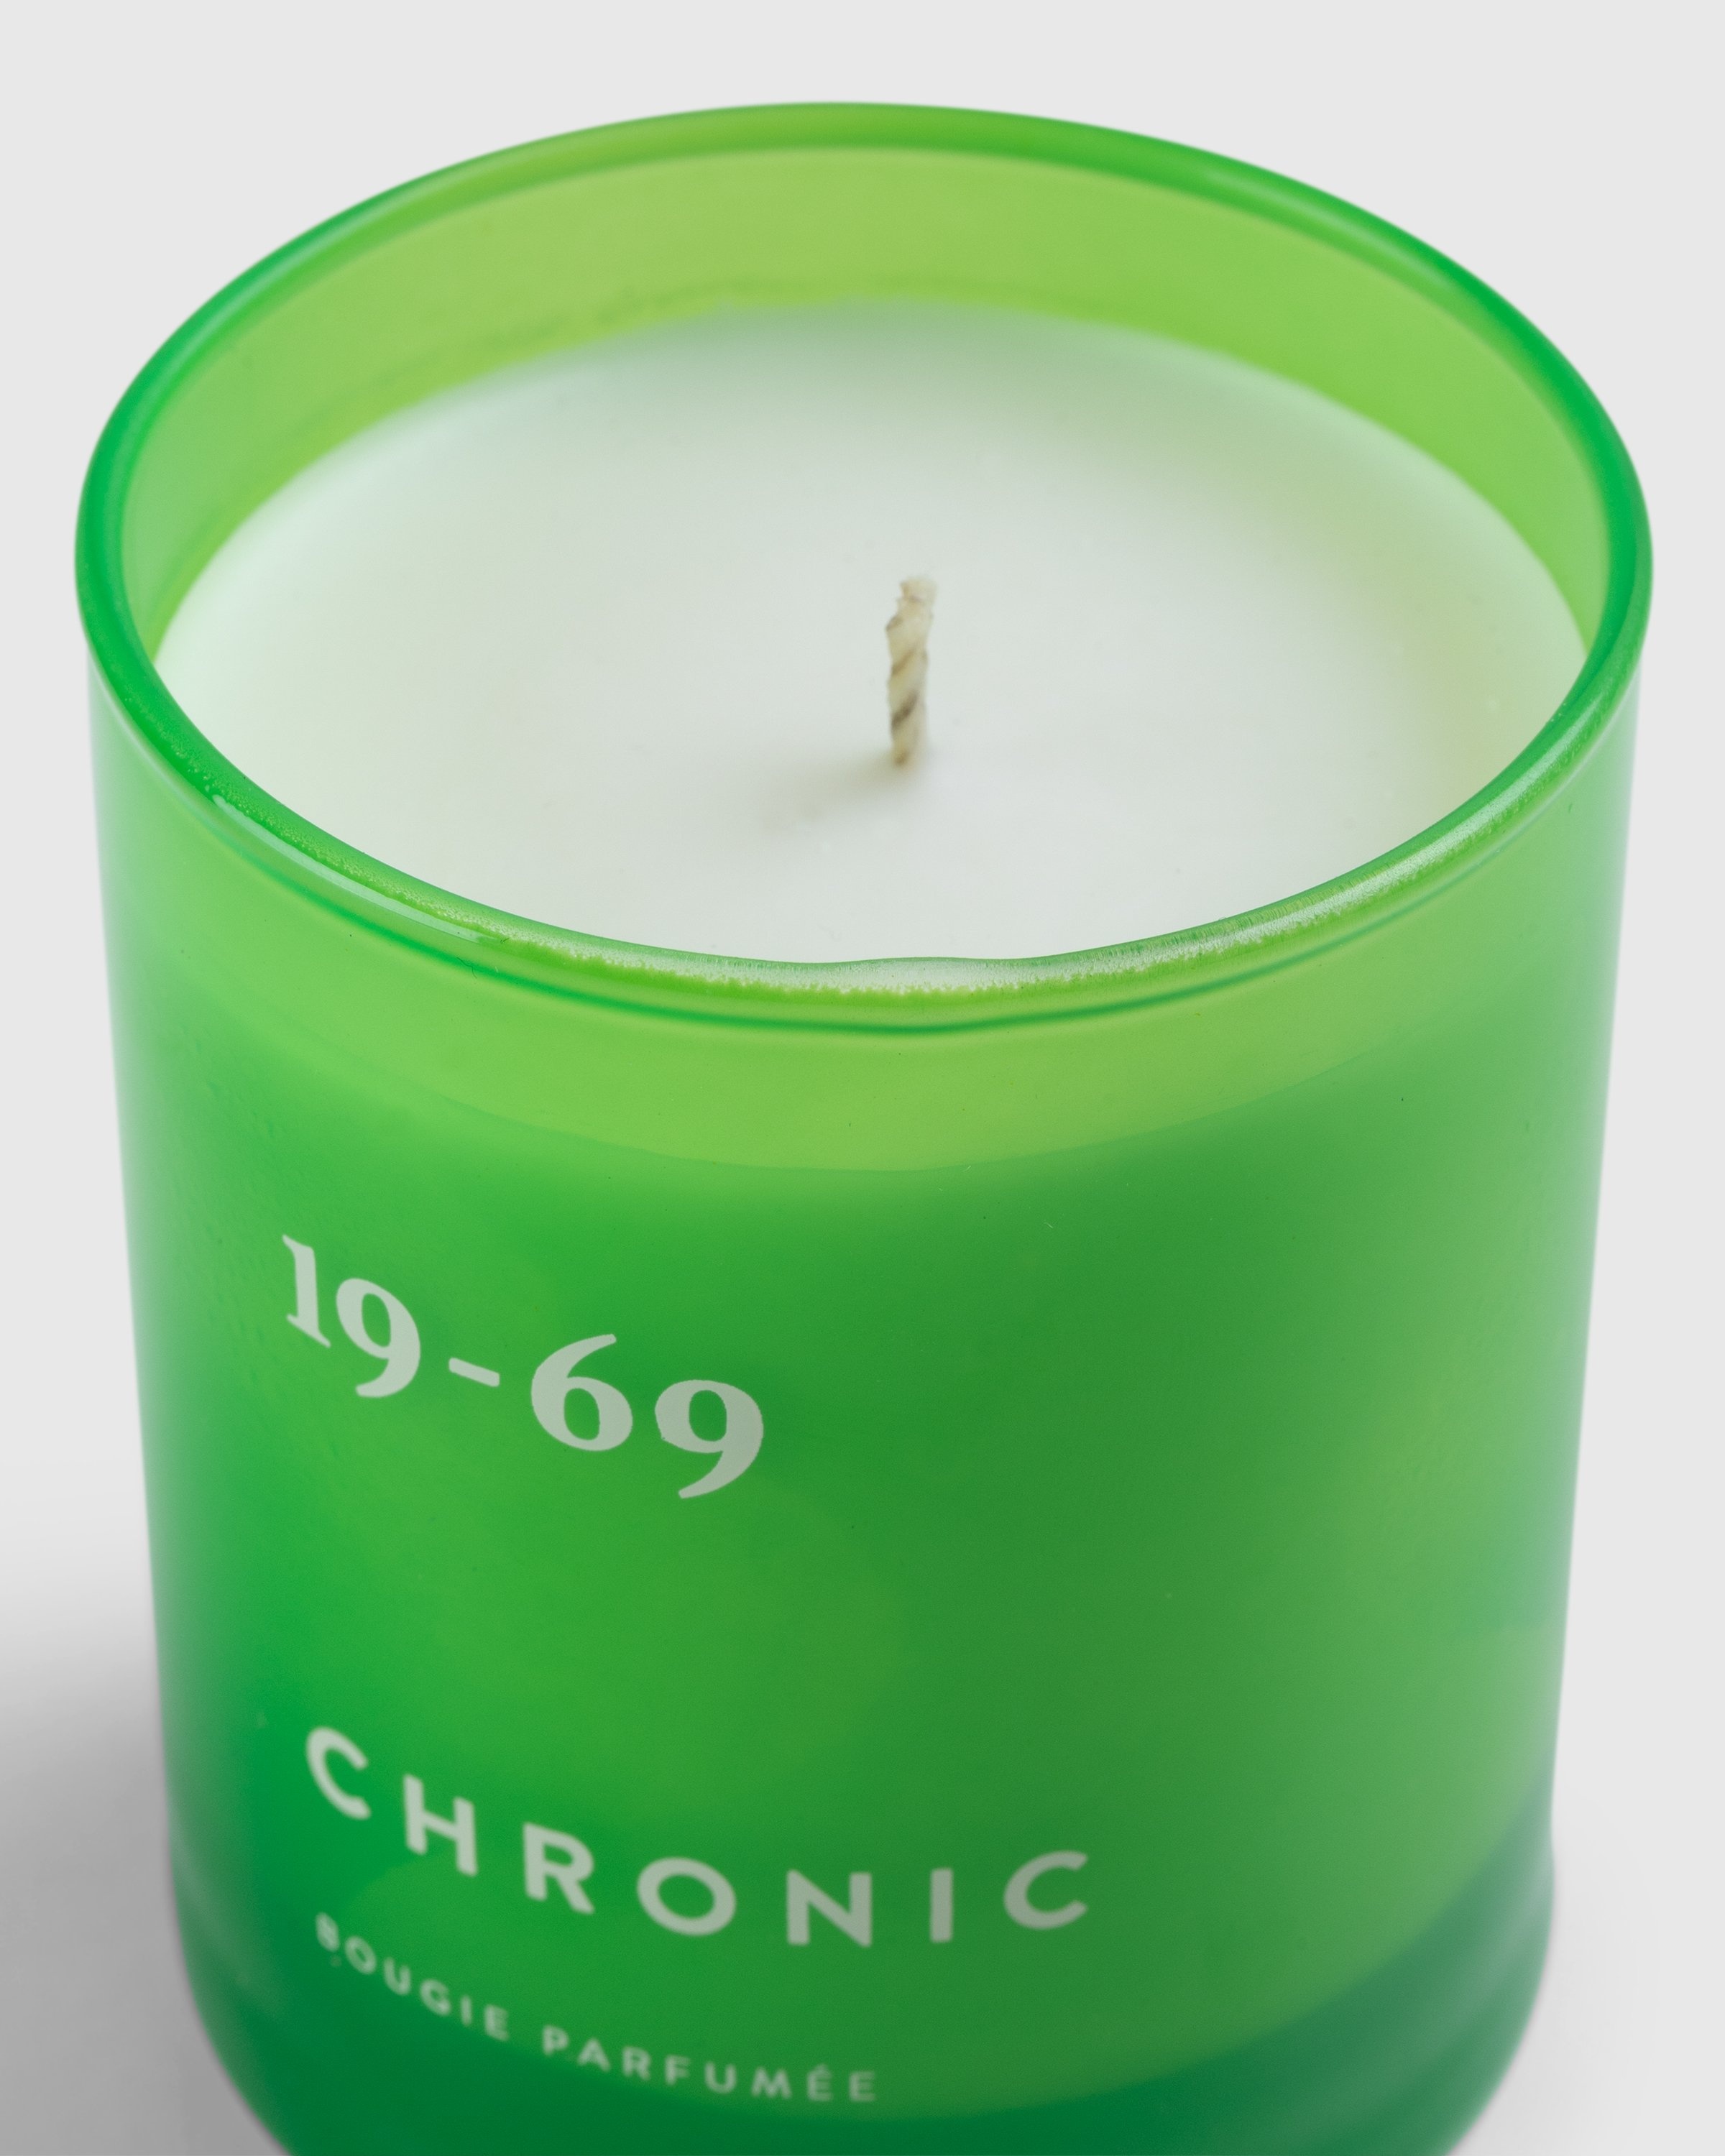 19-69 – Chronic BP Candle - Candles & Fragrances - Green - Image 3